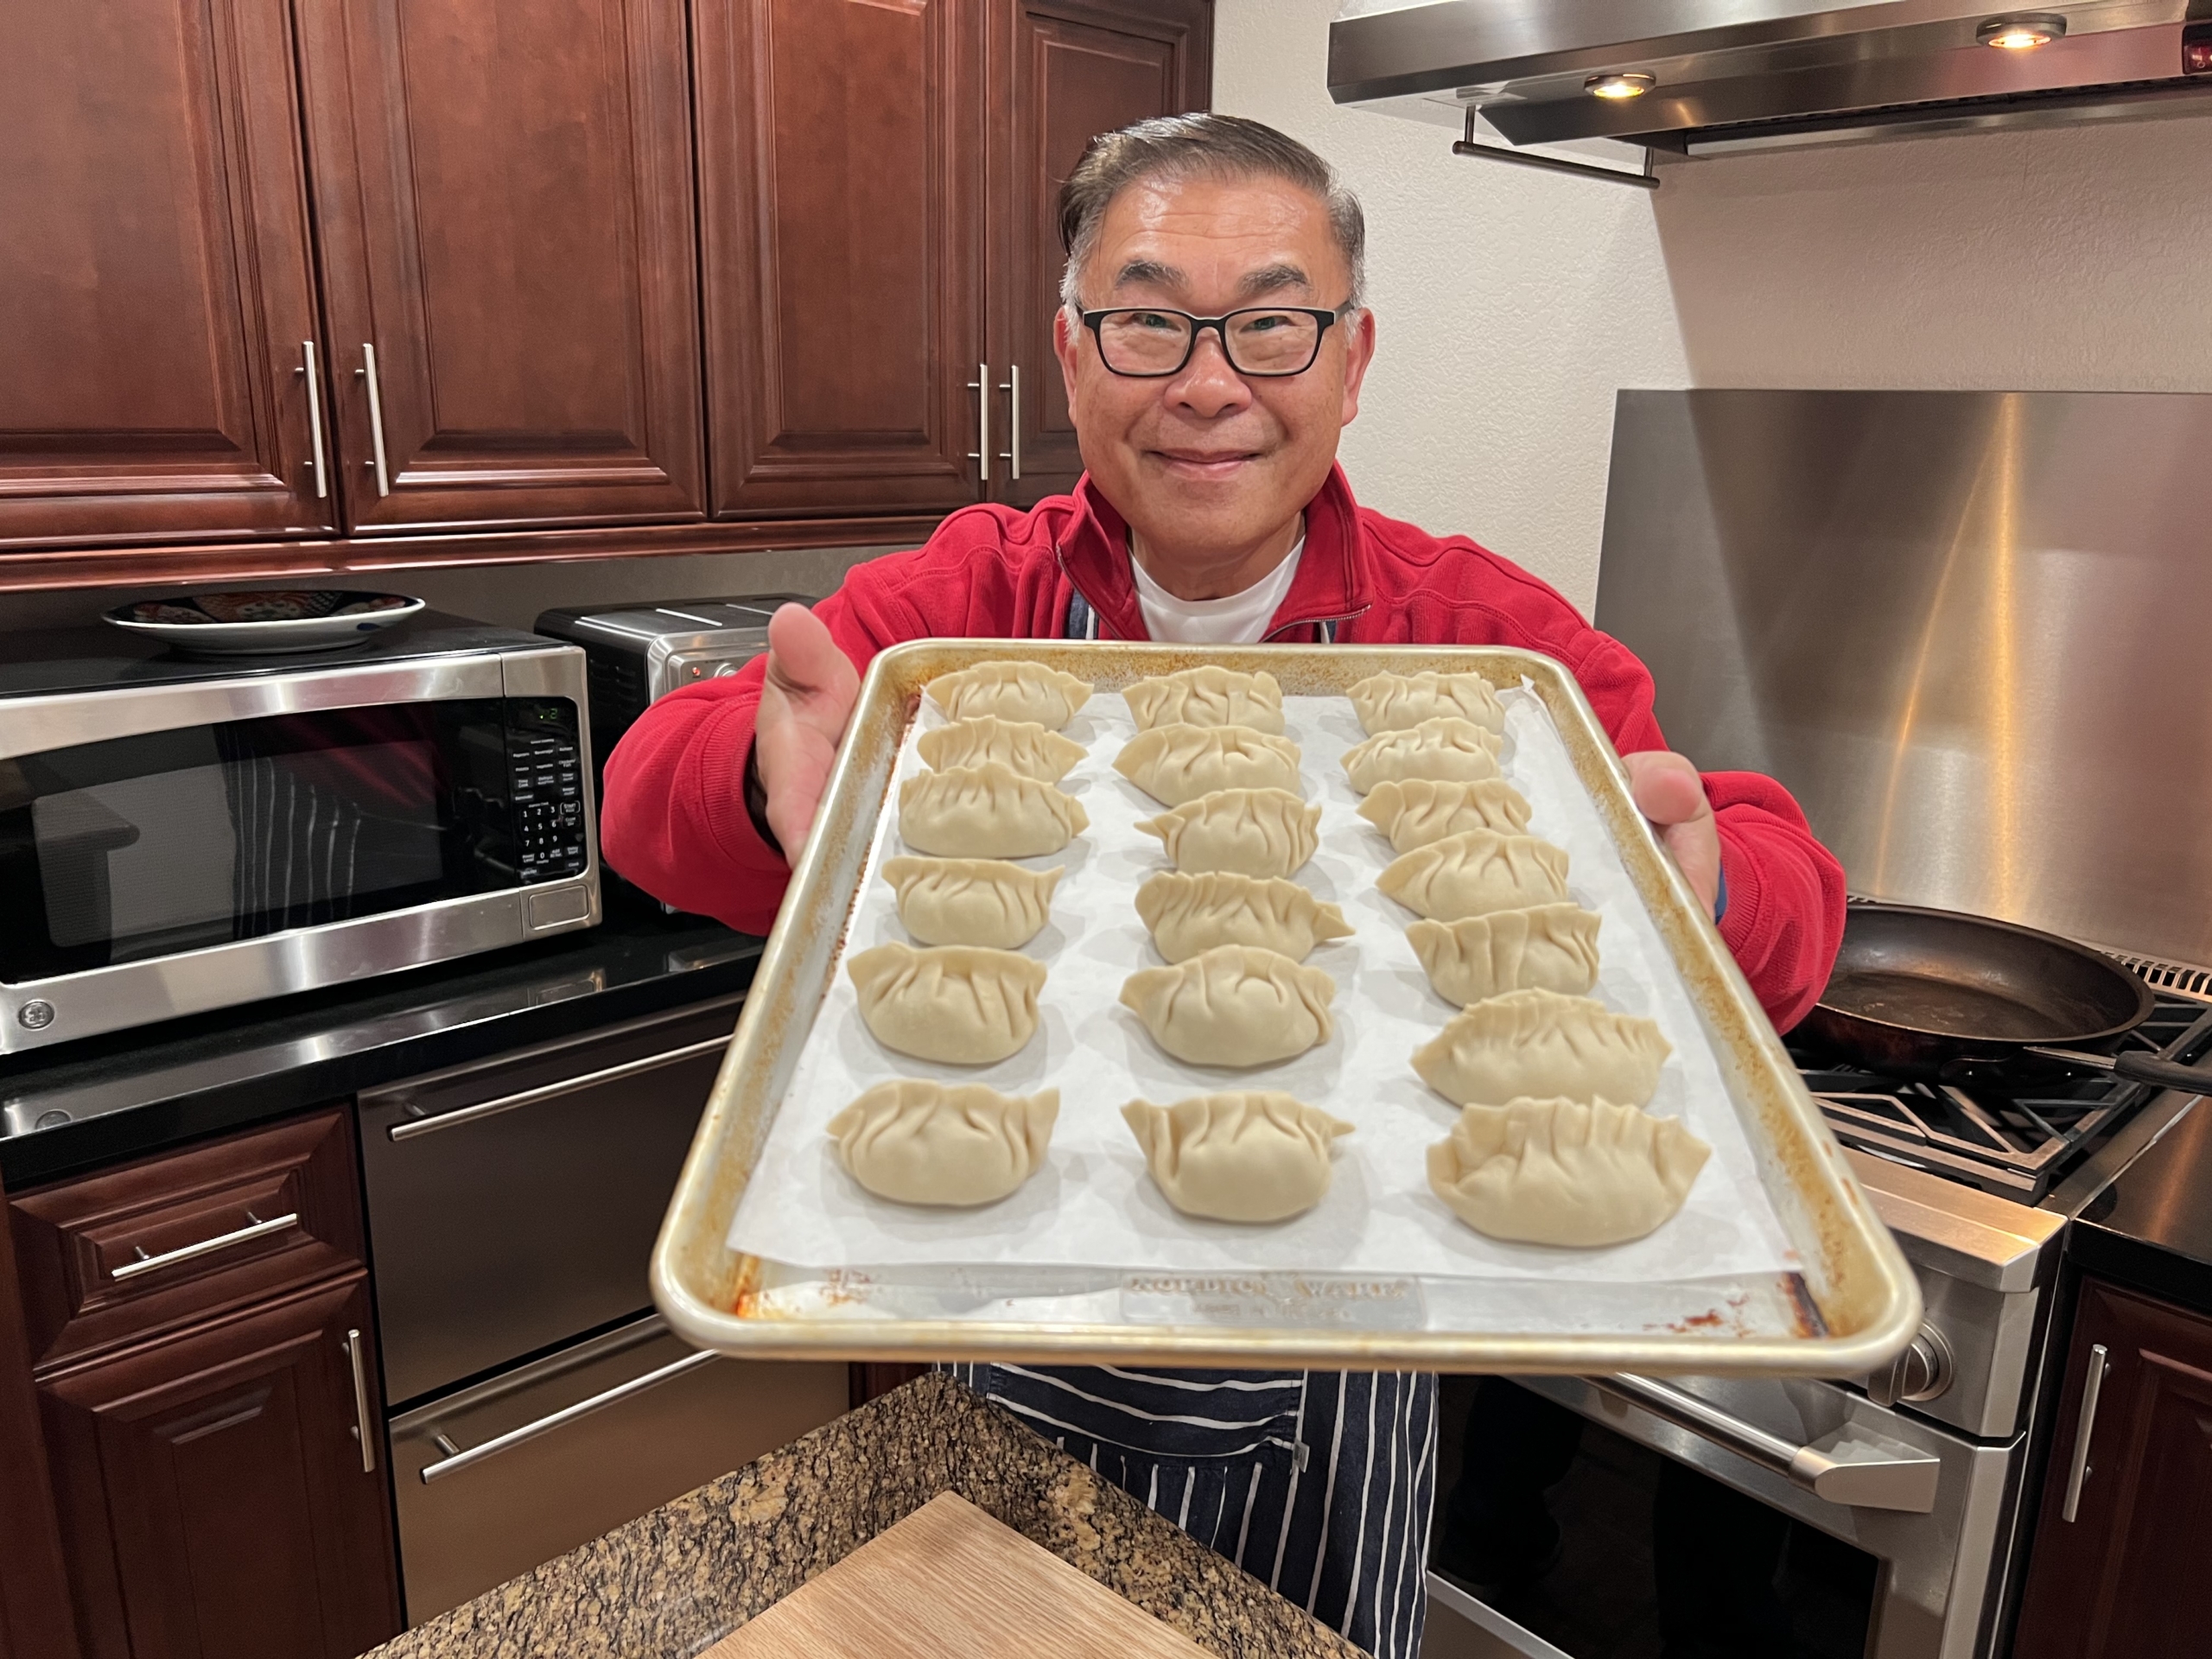 Lance Lew holds out a baking sheet filled with freshly made potstickers